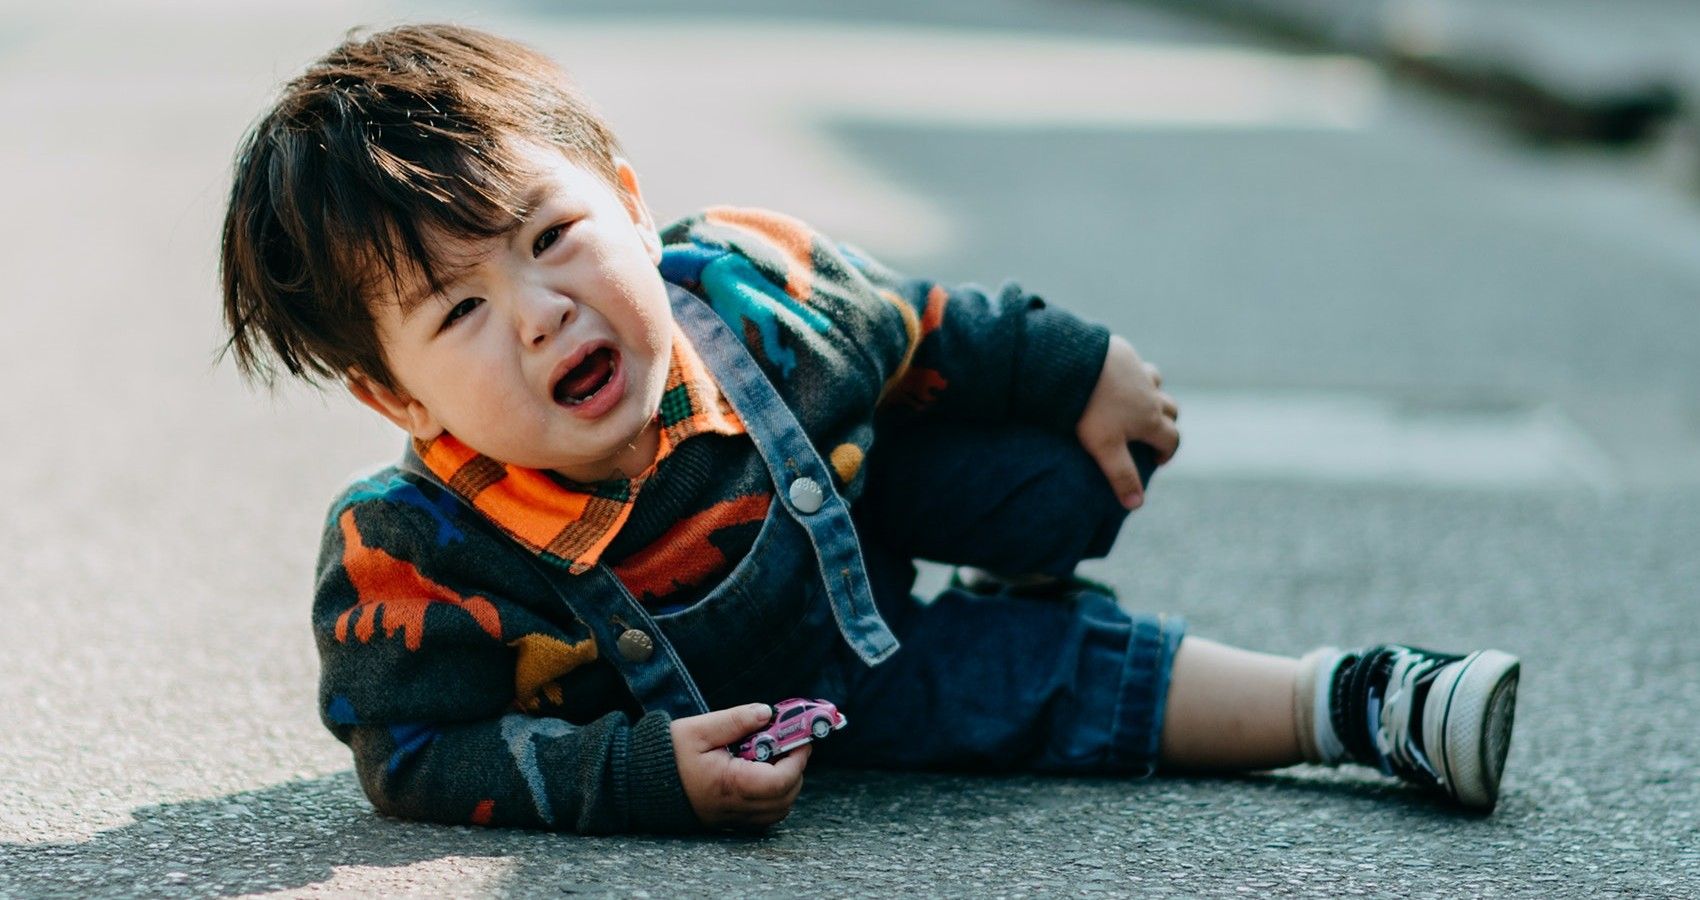 Expert Offers Tips On How To Make Sure Children Are Resilient After Falls